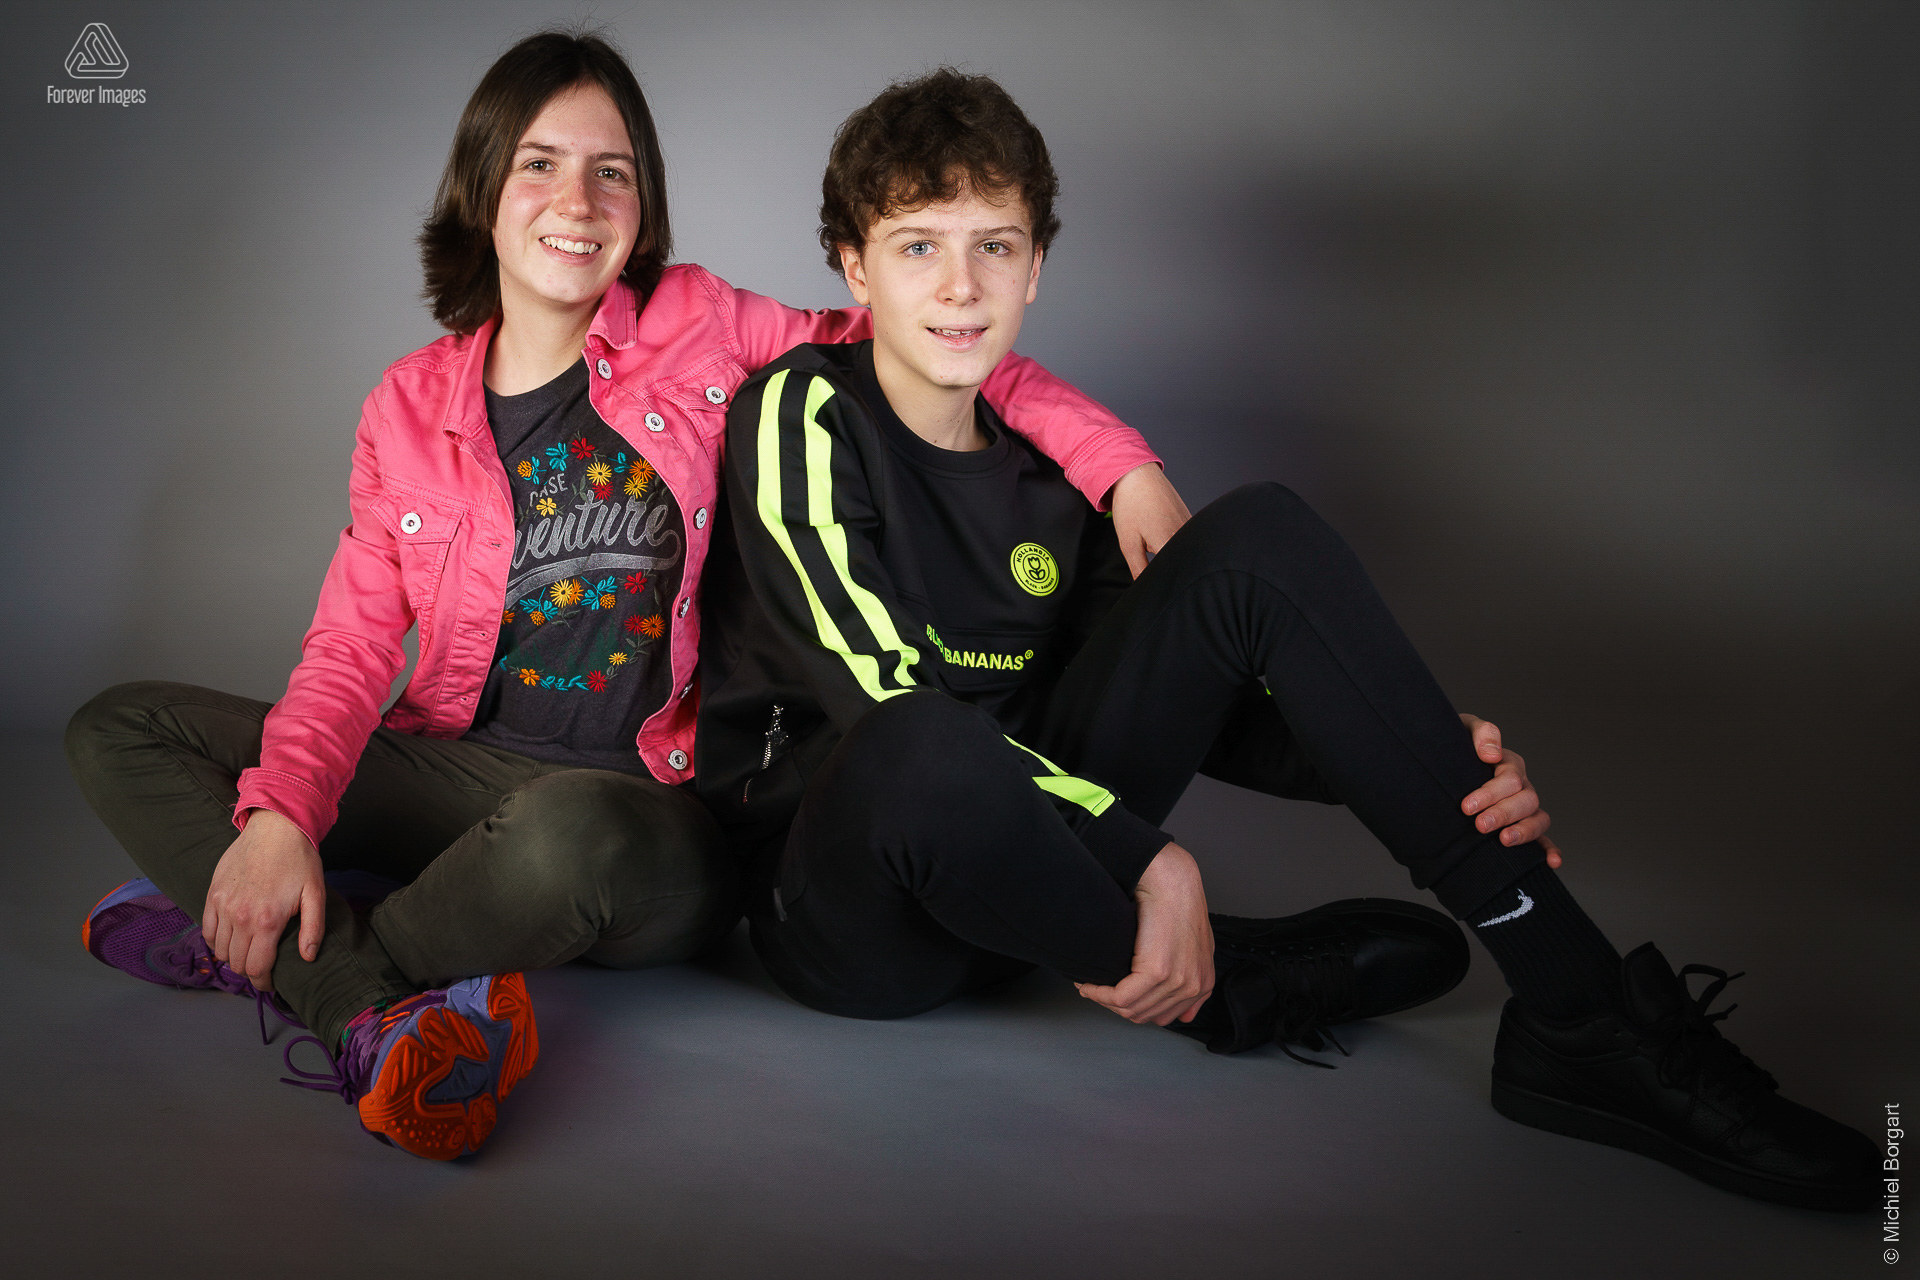 Portrait photo in studio Forever Images brother and sister sitting | Portrait Photographer Michiel Borgart - Forever Images.